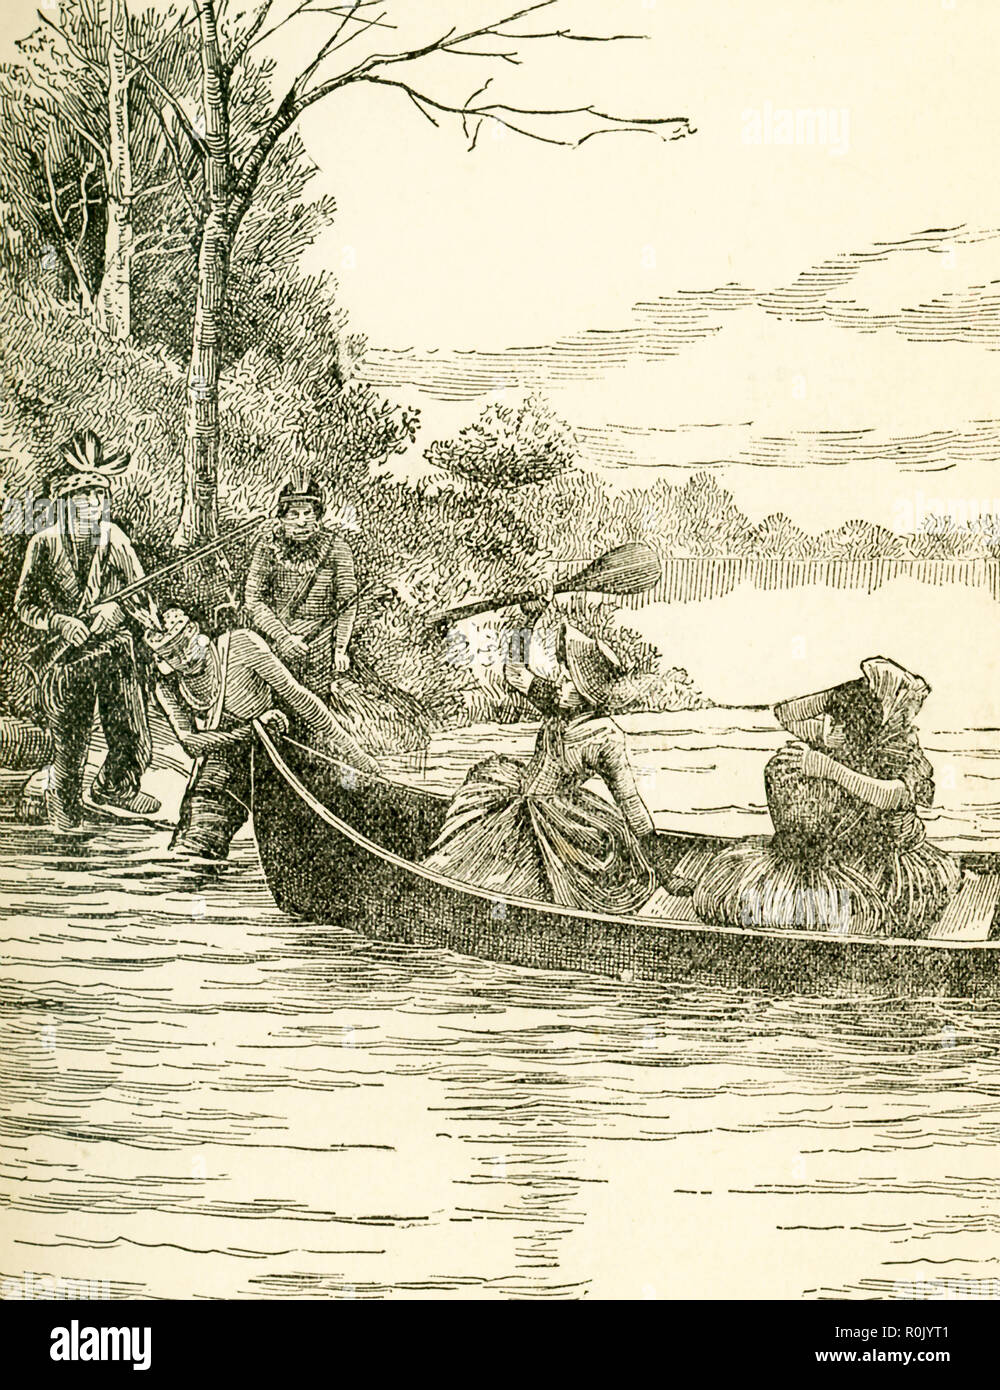 This illustration shows the capture of Miss Jemima Boone (sister of Daniel Boone) and her friends Betsy and Frances Callaway by Indians from Boonesborough. The girls were all about 14. The girls had been rowing along the river and saw a cluster of wild flowers and went toward the opposite shore to pick them. Their cries were heard  at the fort but too late and the canoe was the only means of crossing the river. Daniel Boone and Robert Callaway were away at the time. When they returned the next day, they and others set out and were able to track the Indians, who were now more than 30 miles away Stock Photo